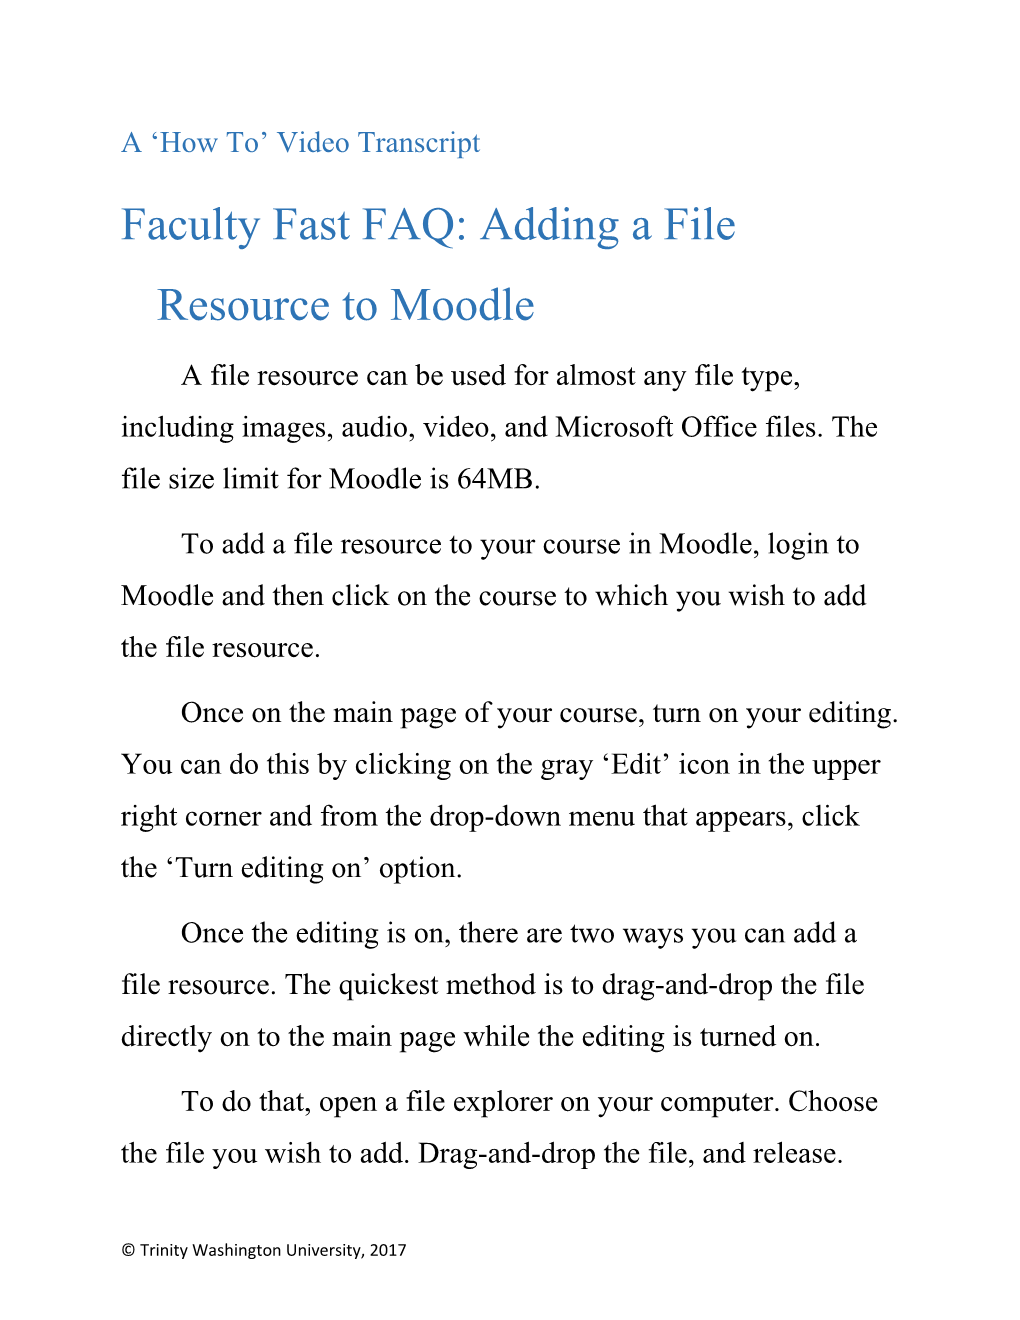 Faculty Fast FAQ: Adding a File Resource to Moodle